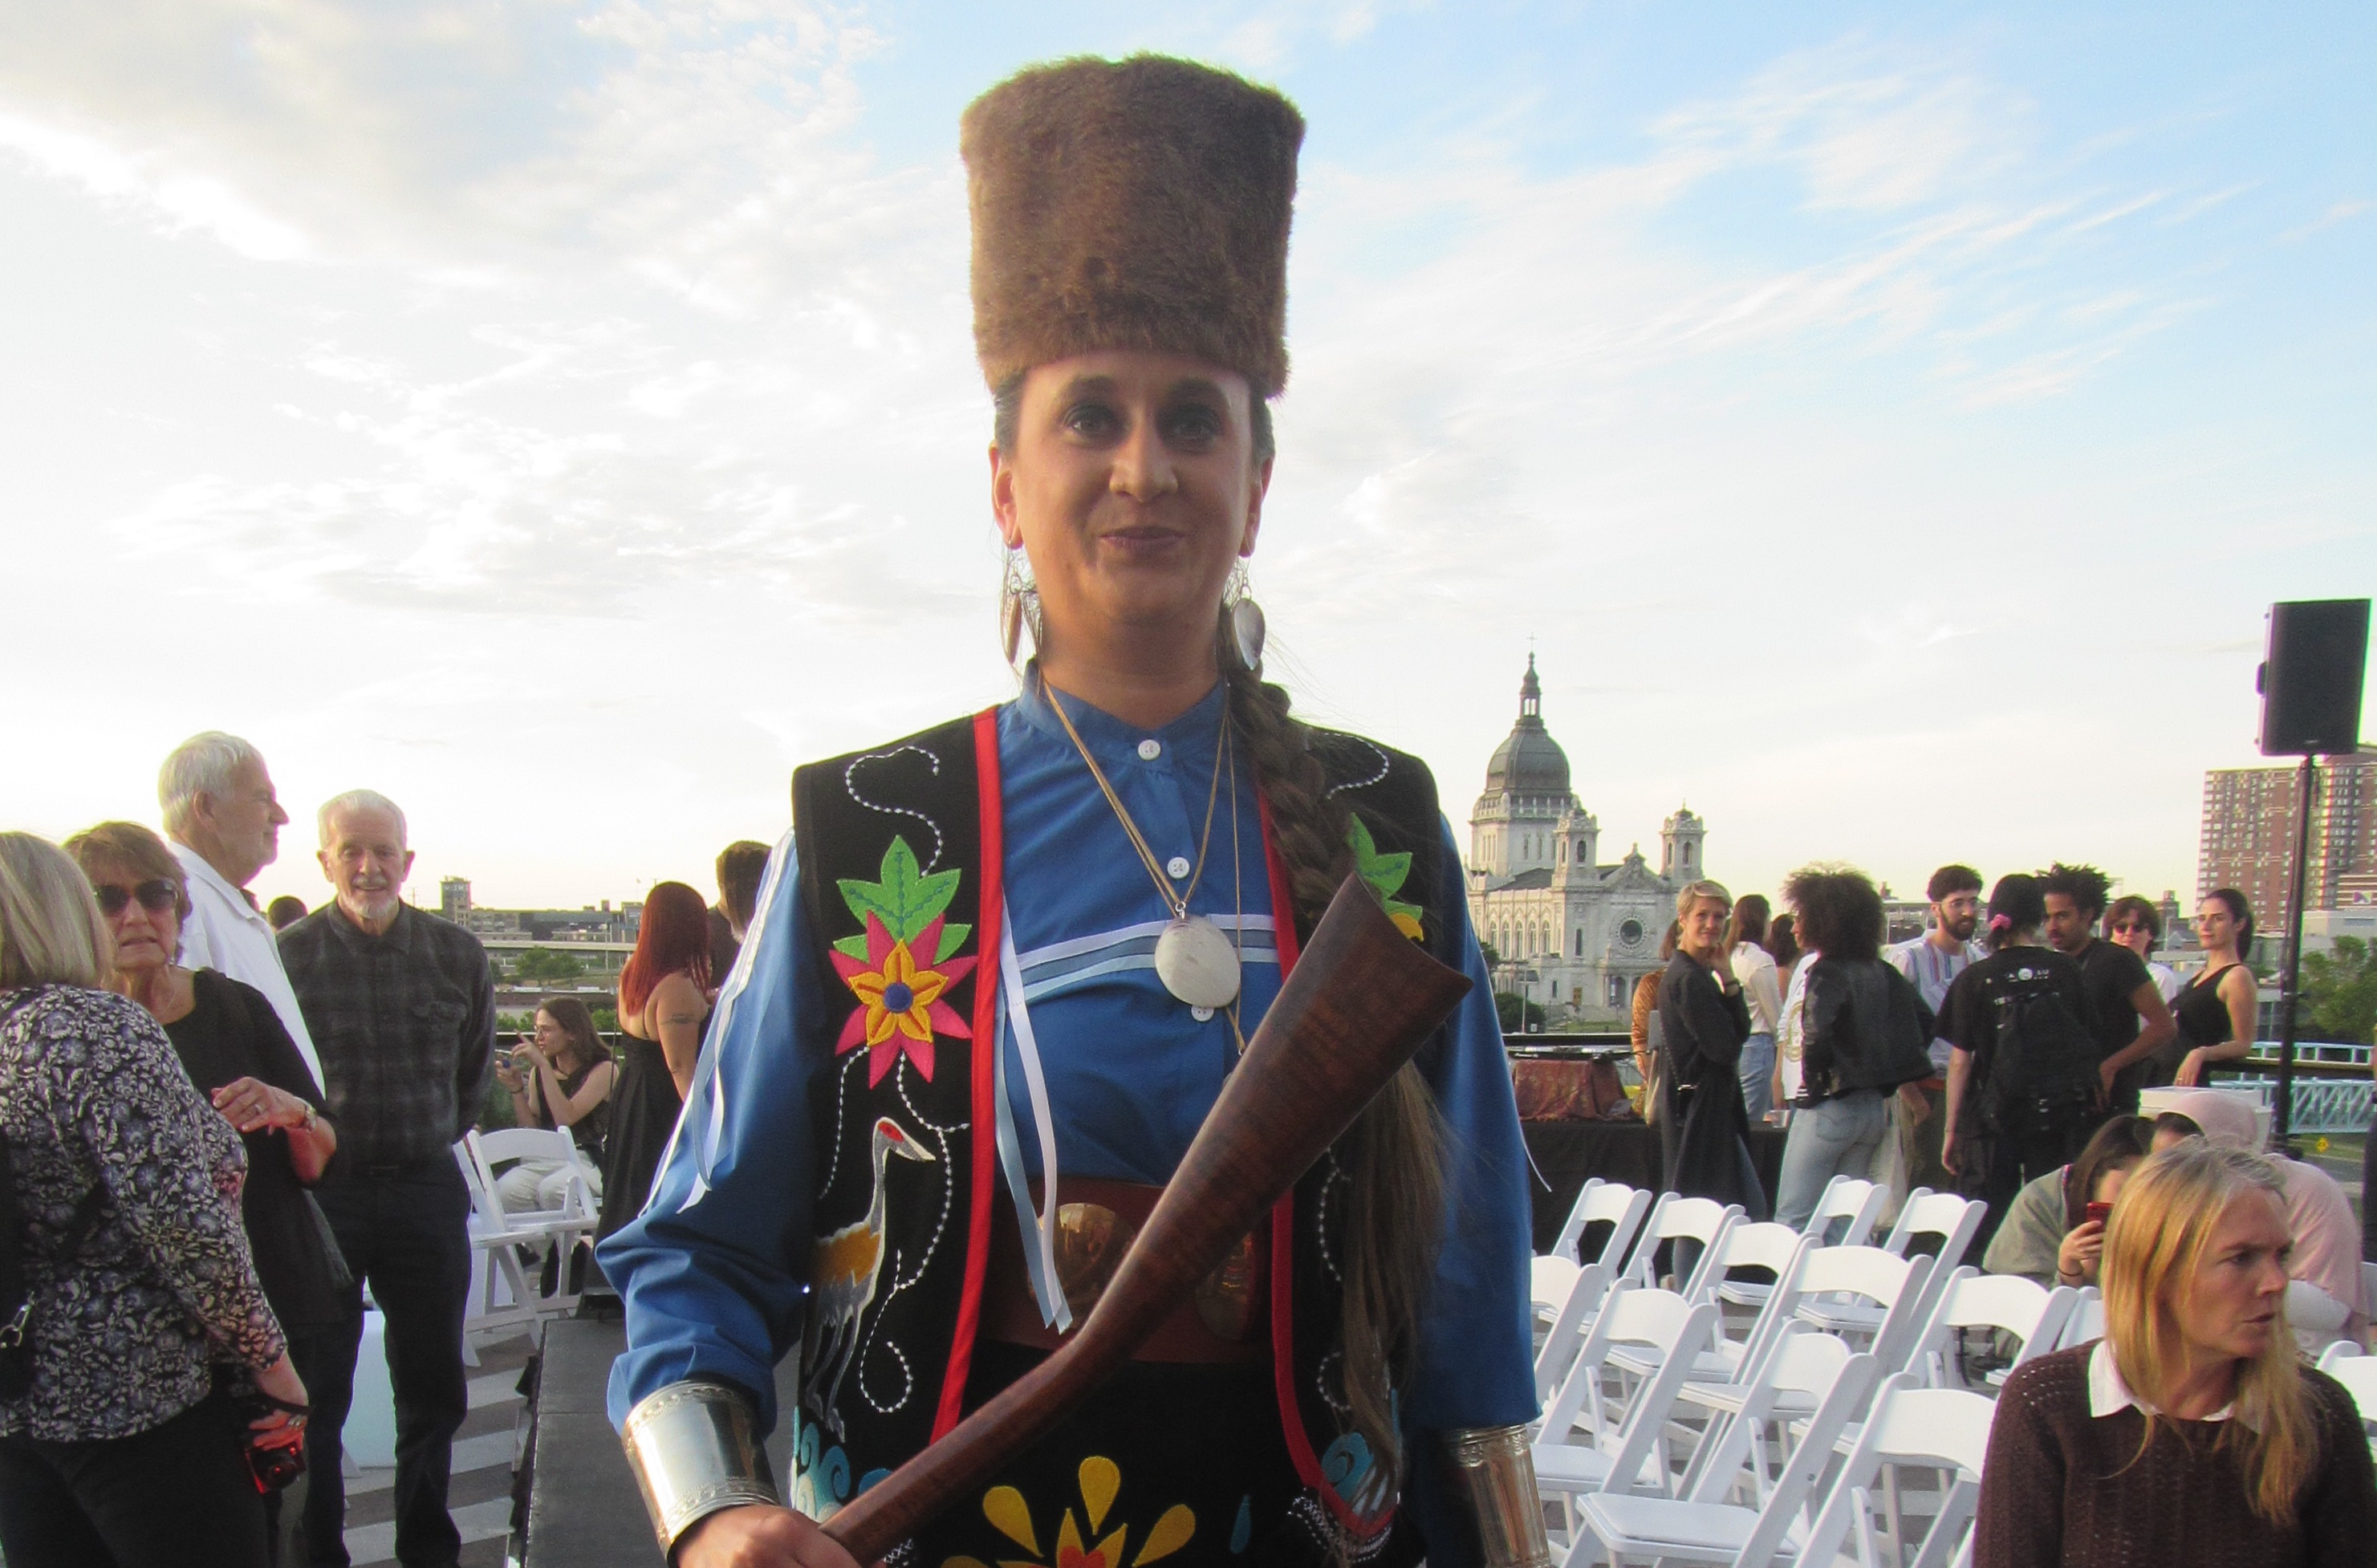 A person wearing black and blue garb